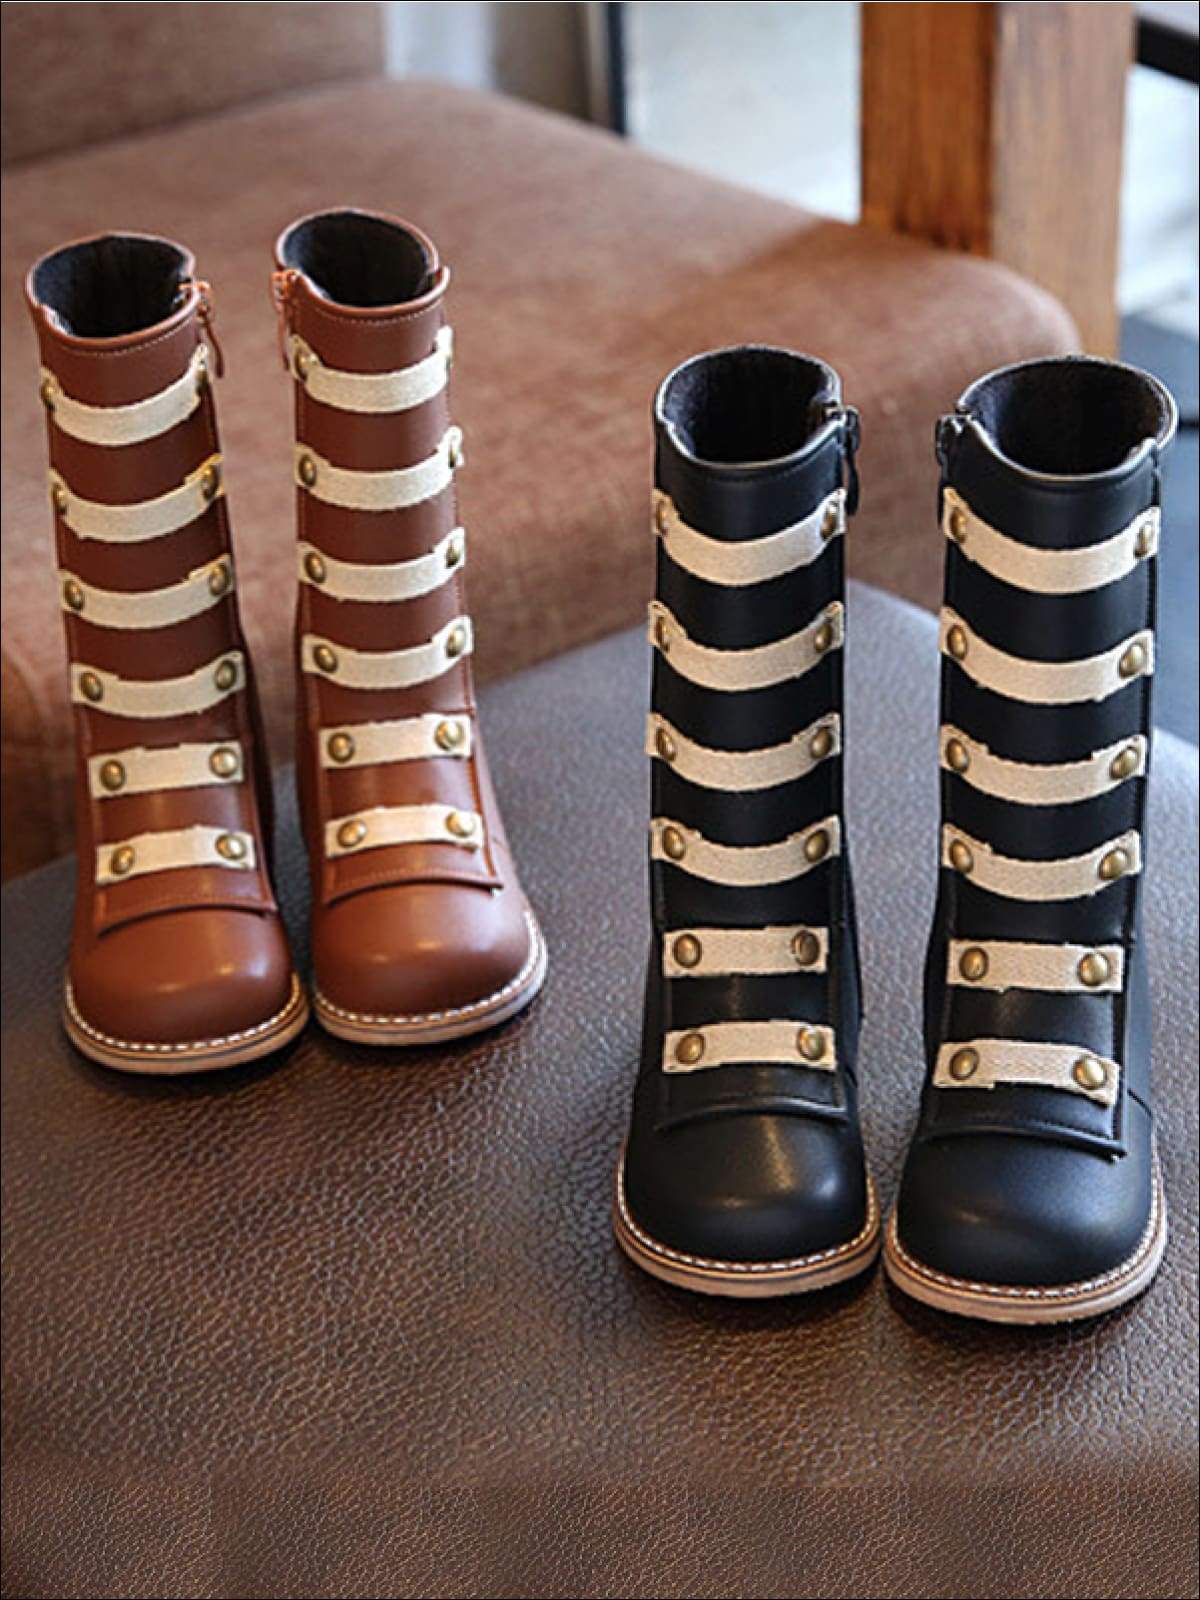 Girls Black & Brown Military Style Boots - Girls Boots